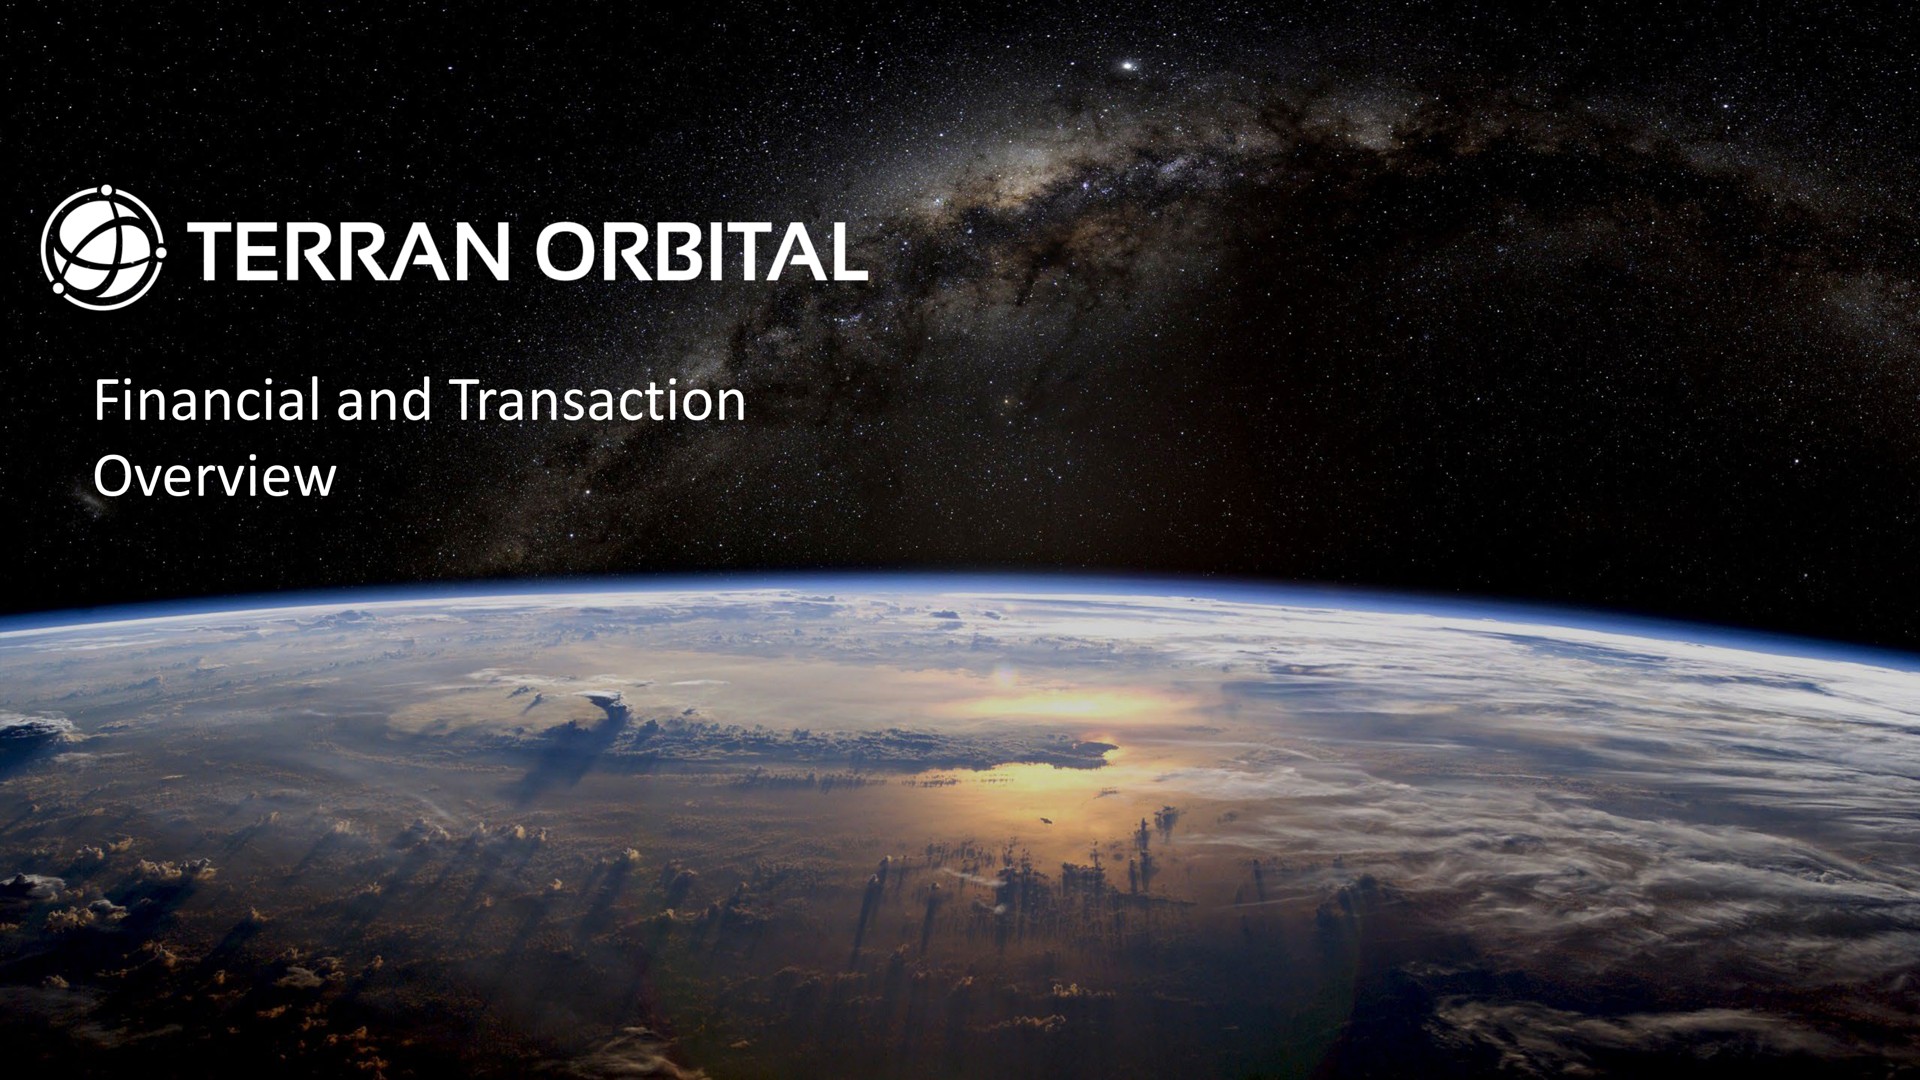 financial and transaction overview | Terran Orbital